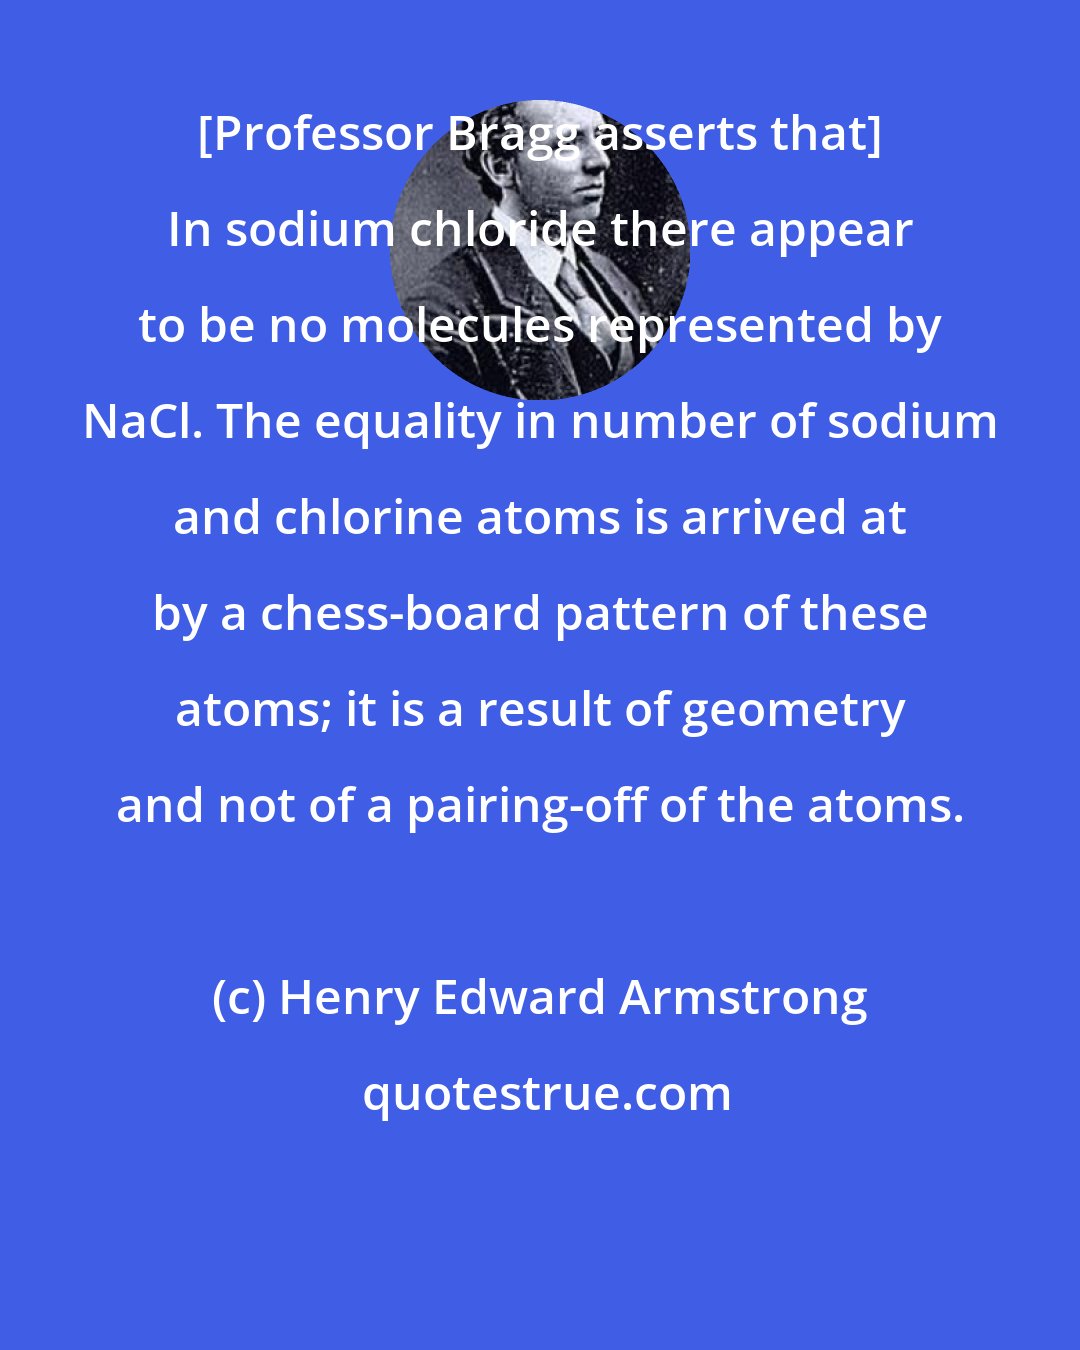 Henry Edward Armstrong: [Professor Bragg asserts that] In sodium chloride there appear to be no molecules represented by NaCl. The equality in number of sodium and chlorine atoms is arrived at by a chess-board pattern of these atoms; it is a result of geometry and not of a pairing-off of the atoms.